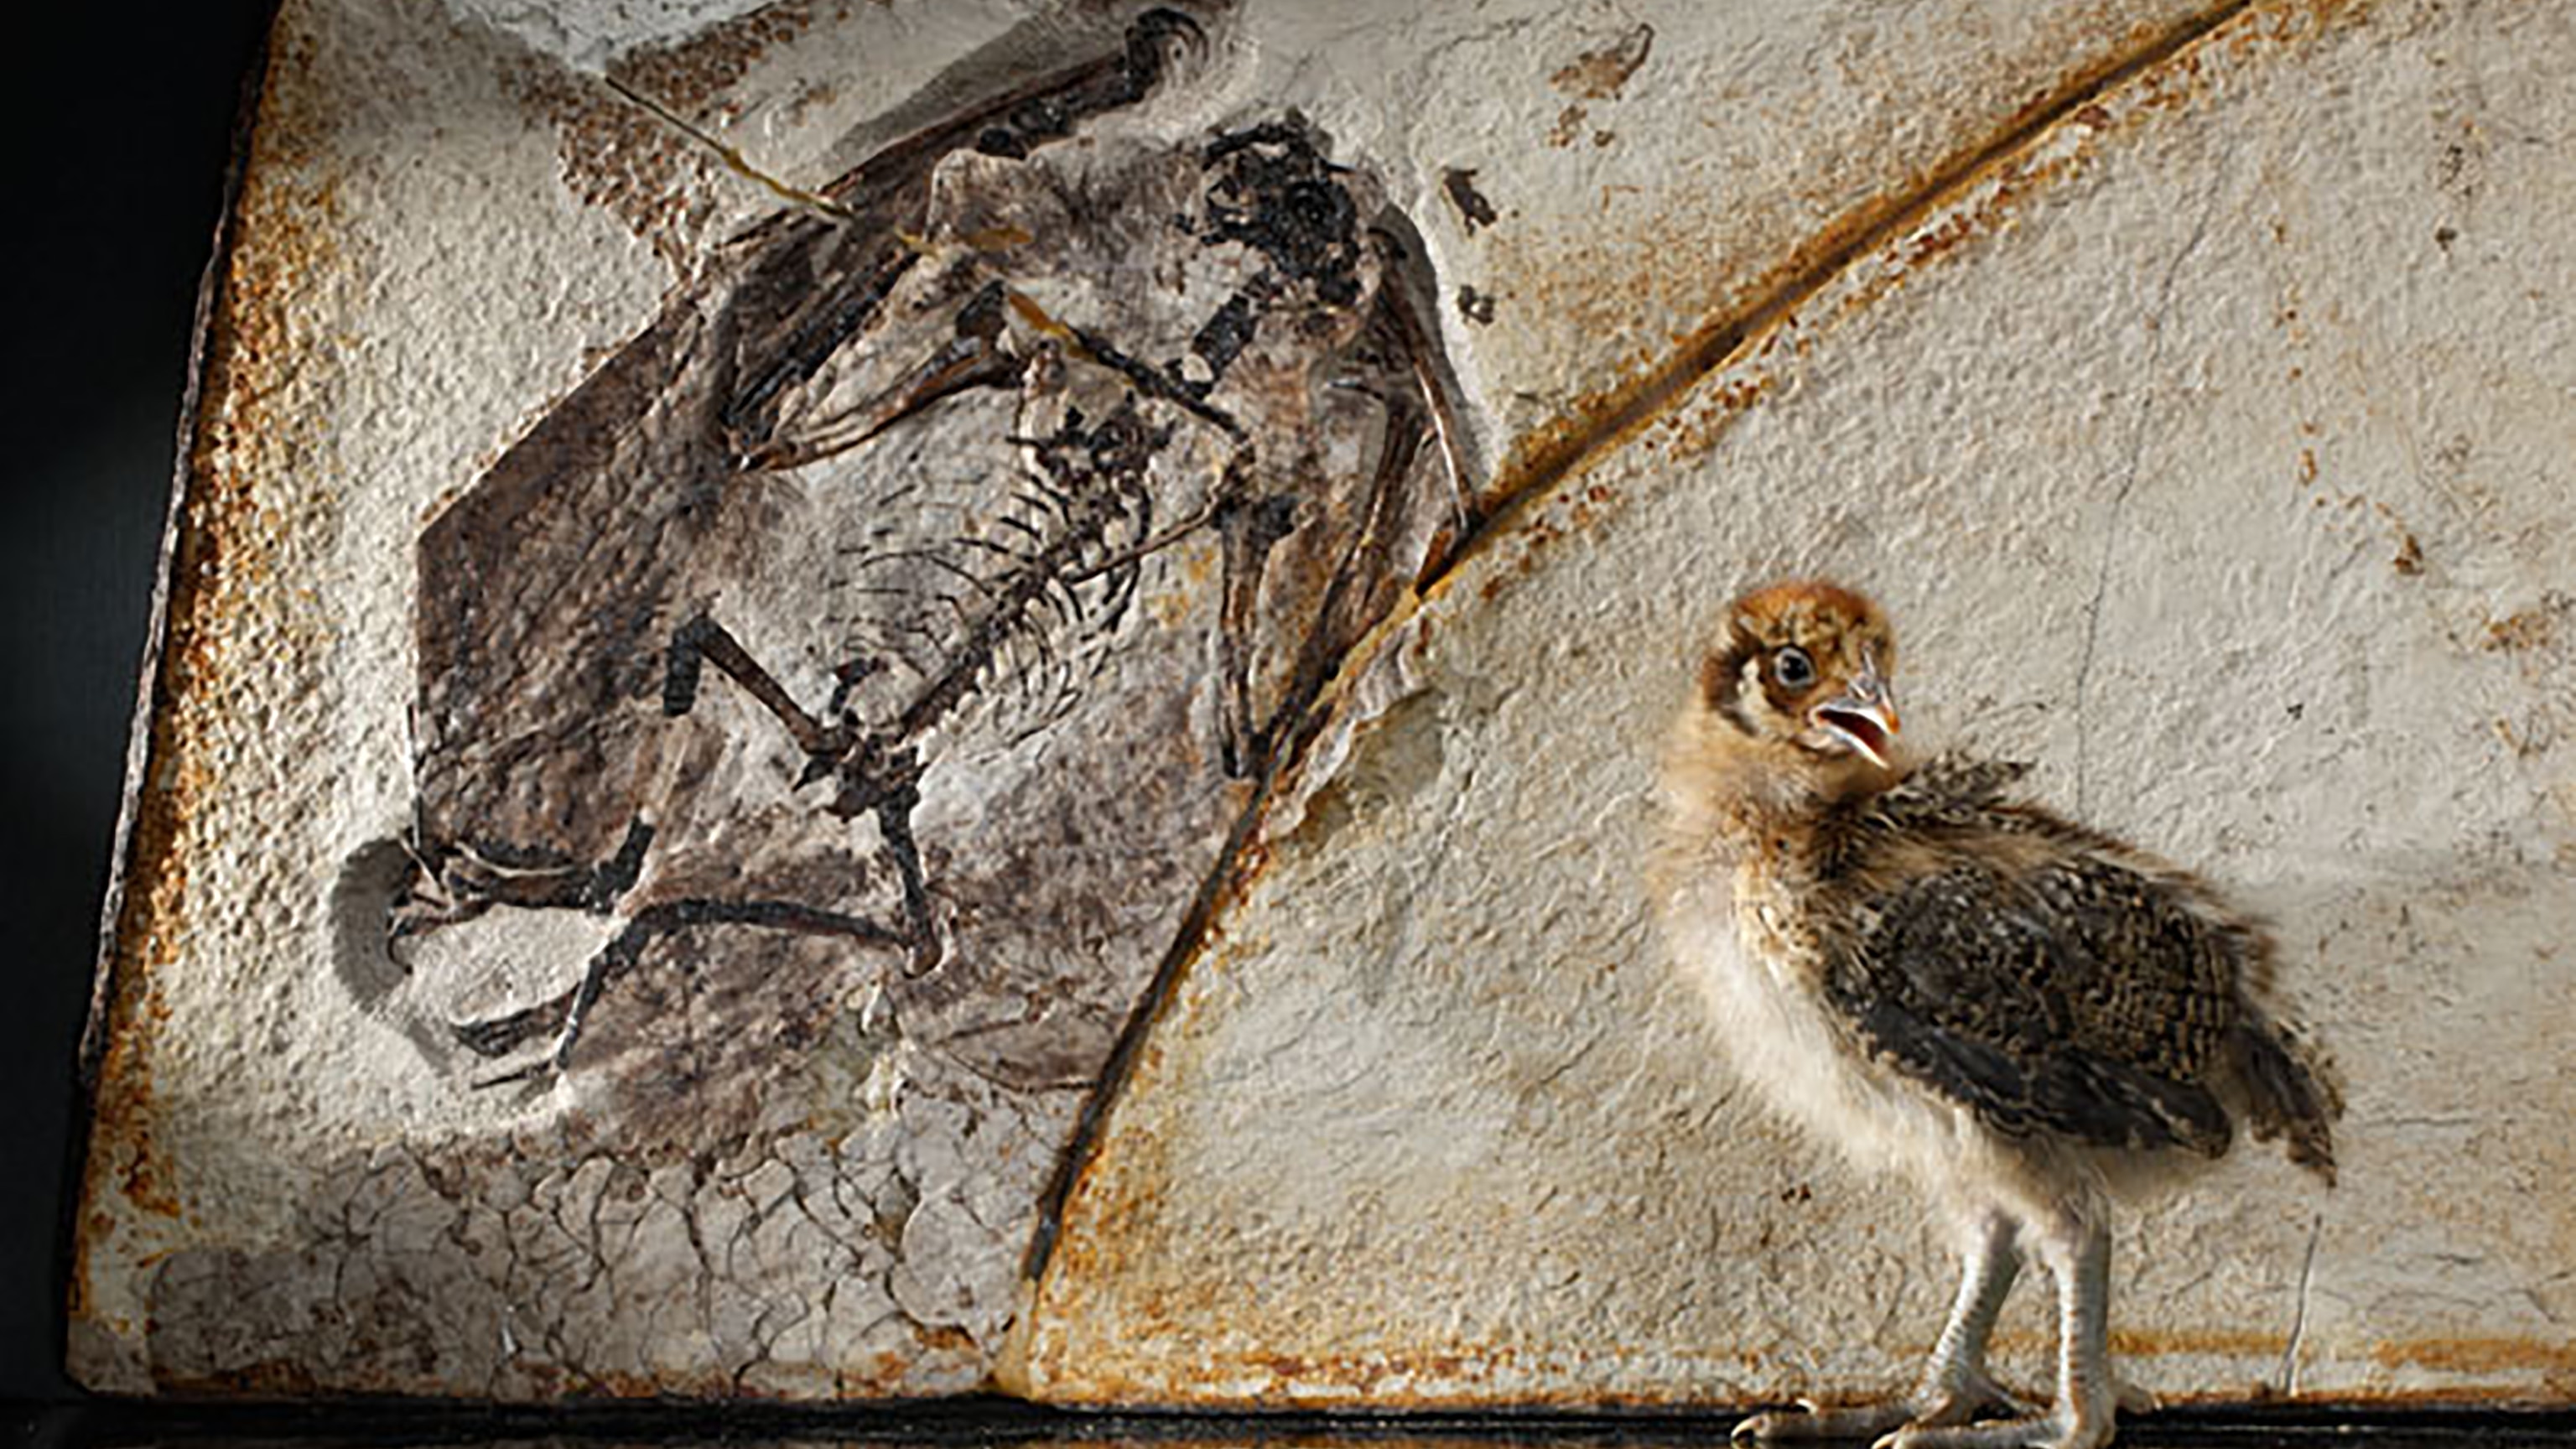 New Discoveries have pushed back the origin of feathers by 70 million years